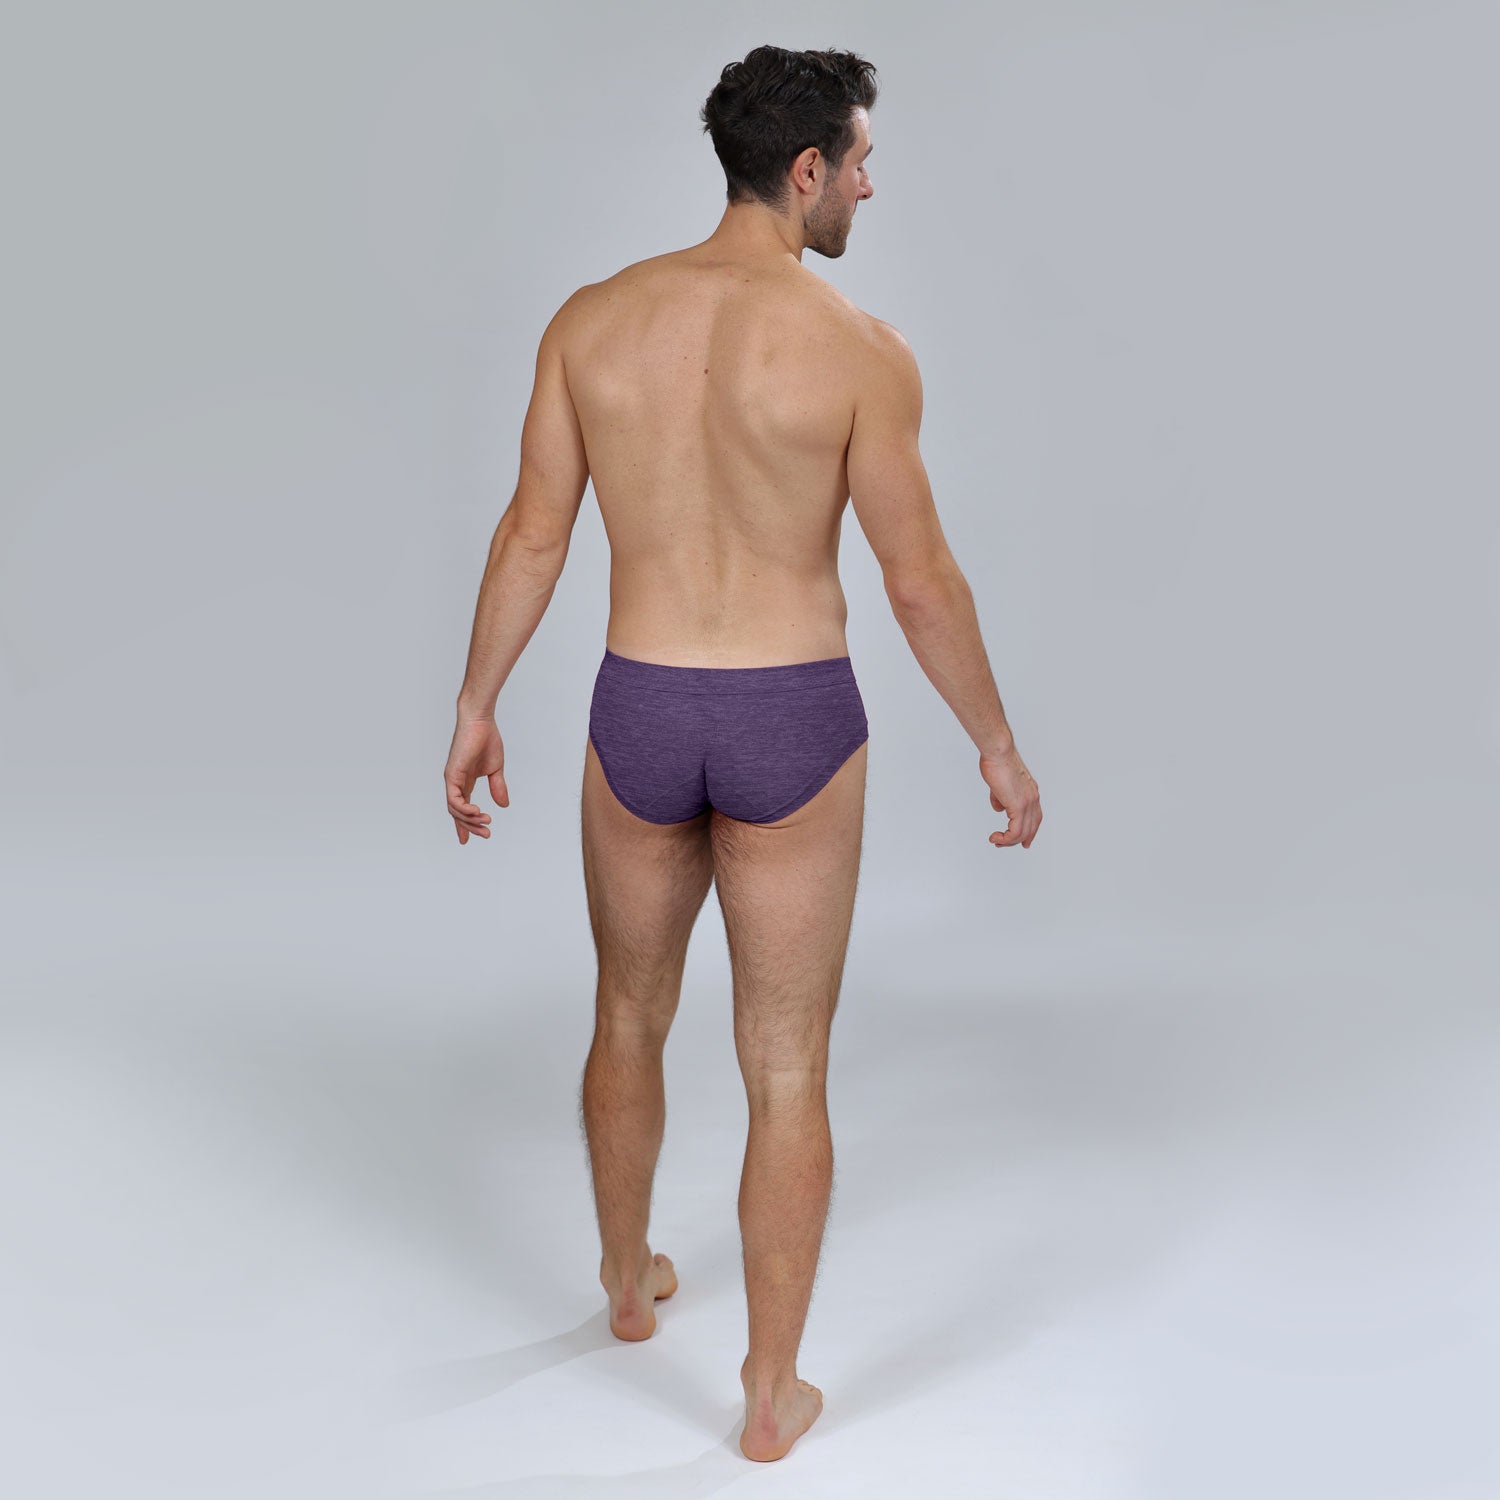 The Limited Edition Acai Purple Brief for men in the USA and Canada